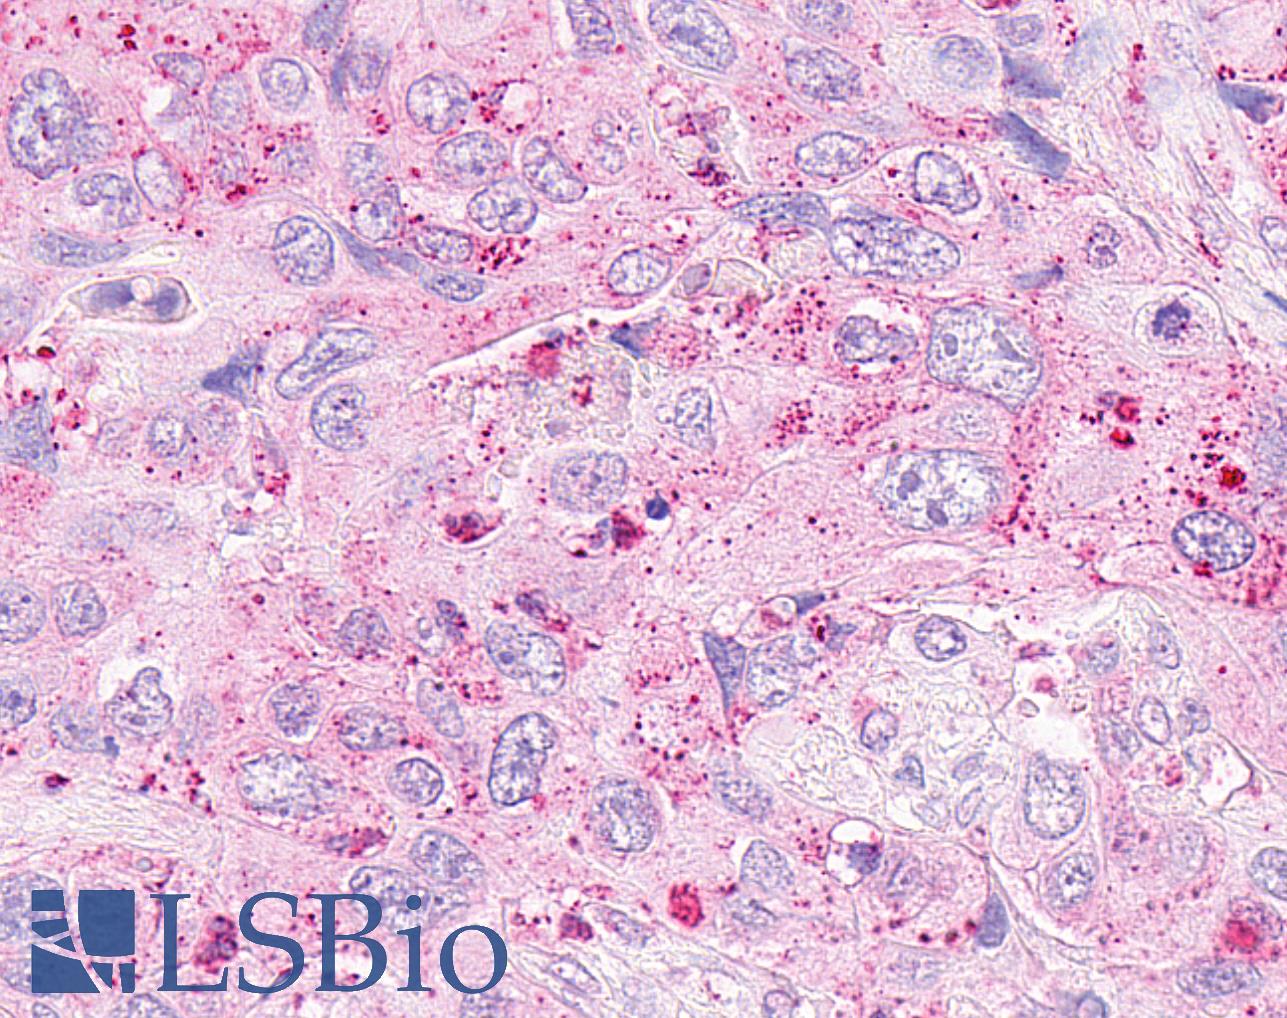 OXER1 Antibody - Anti-OXER1 antibody IHC of human Pancreas, Carcinoma. Immunohistochemistry of formalin-fixed, paraffin-embedded tissue after heat-induced antigen retrieval.